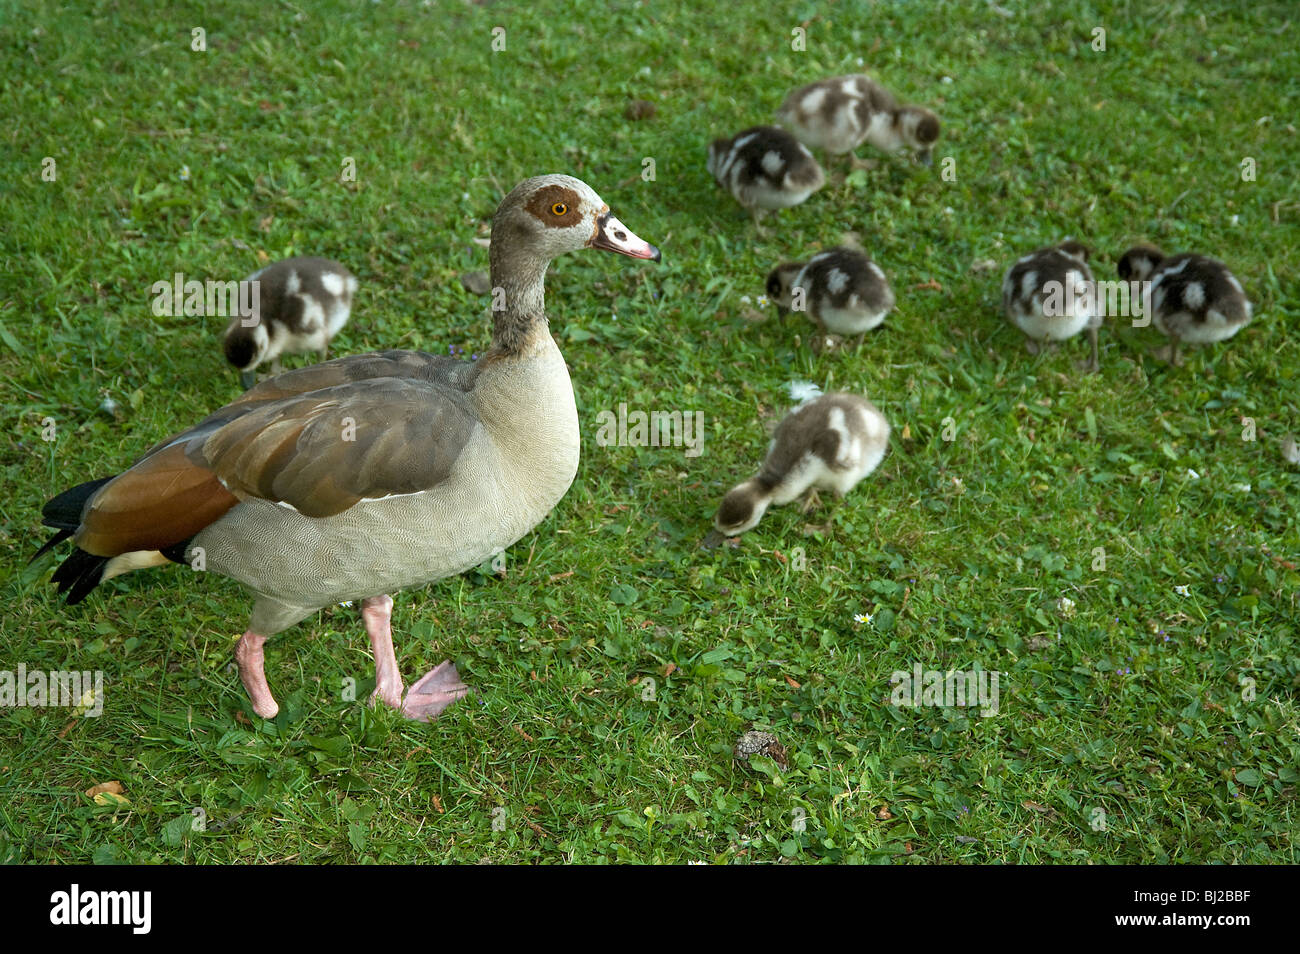 Egyptian goose, Alopochen aegyptiacus, lost foot defending 7 young goslings from predator - probably a fox Stock Photo